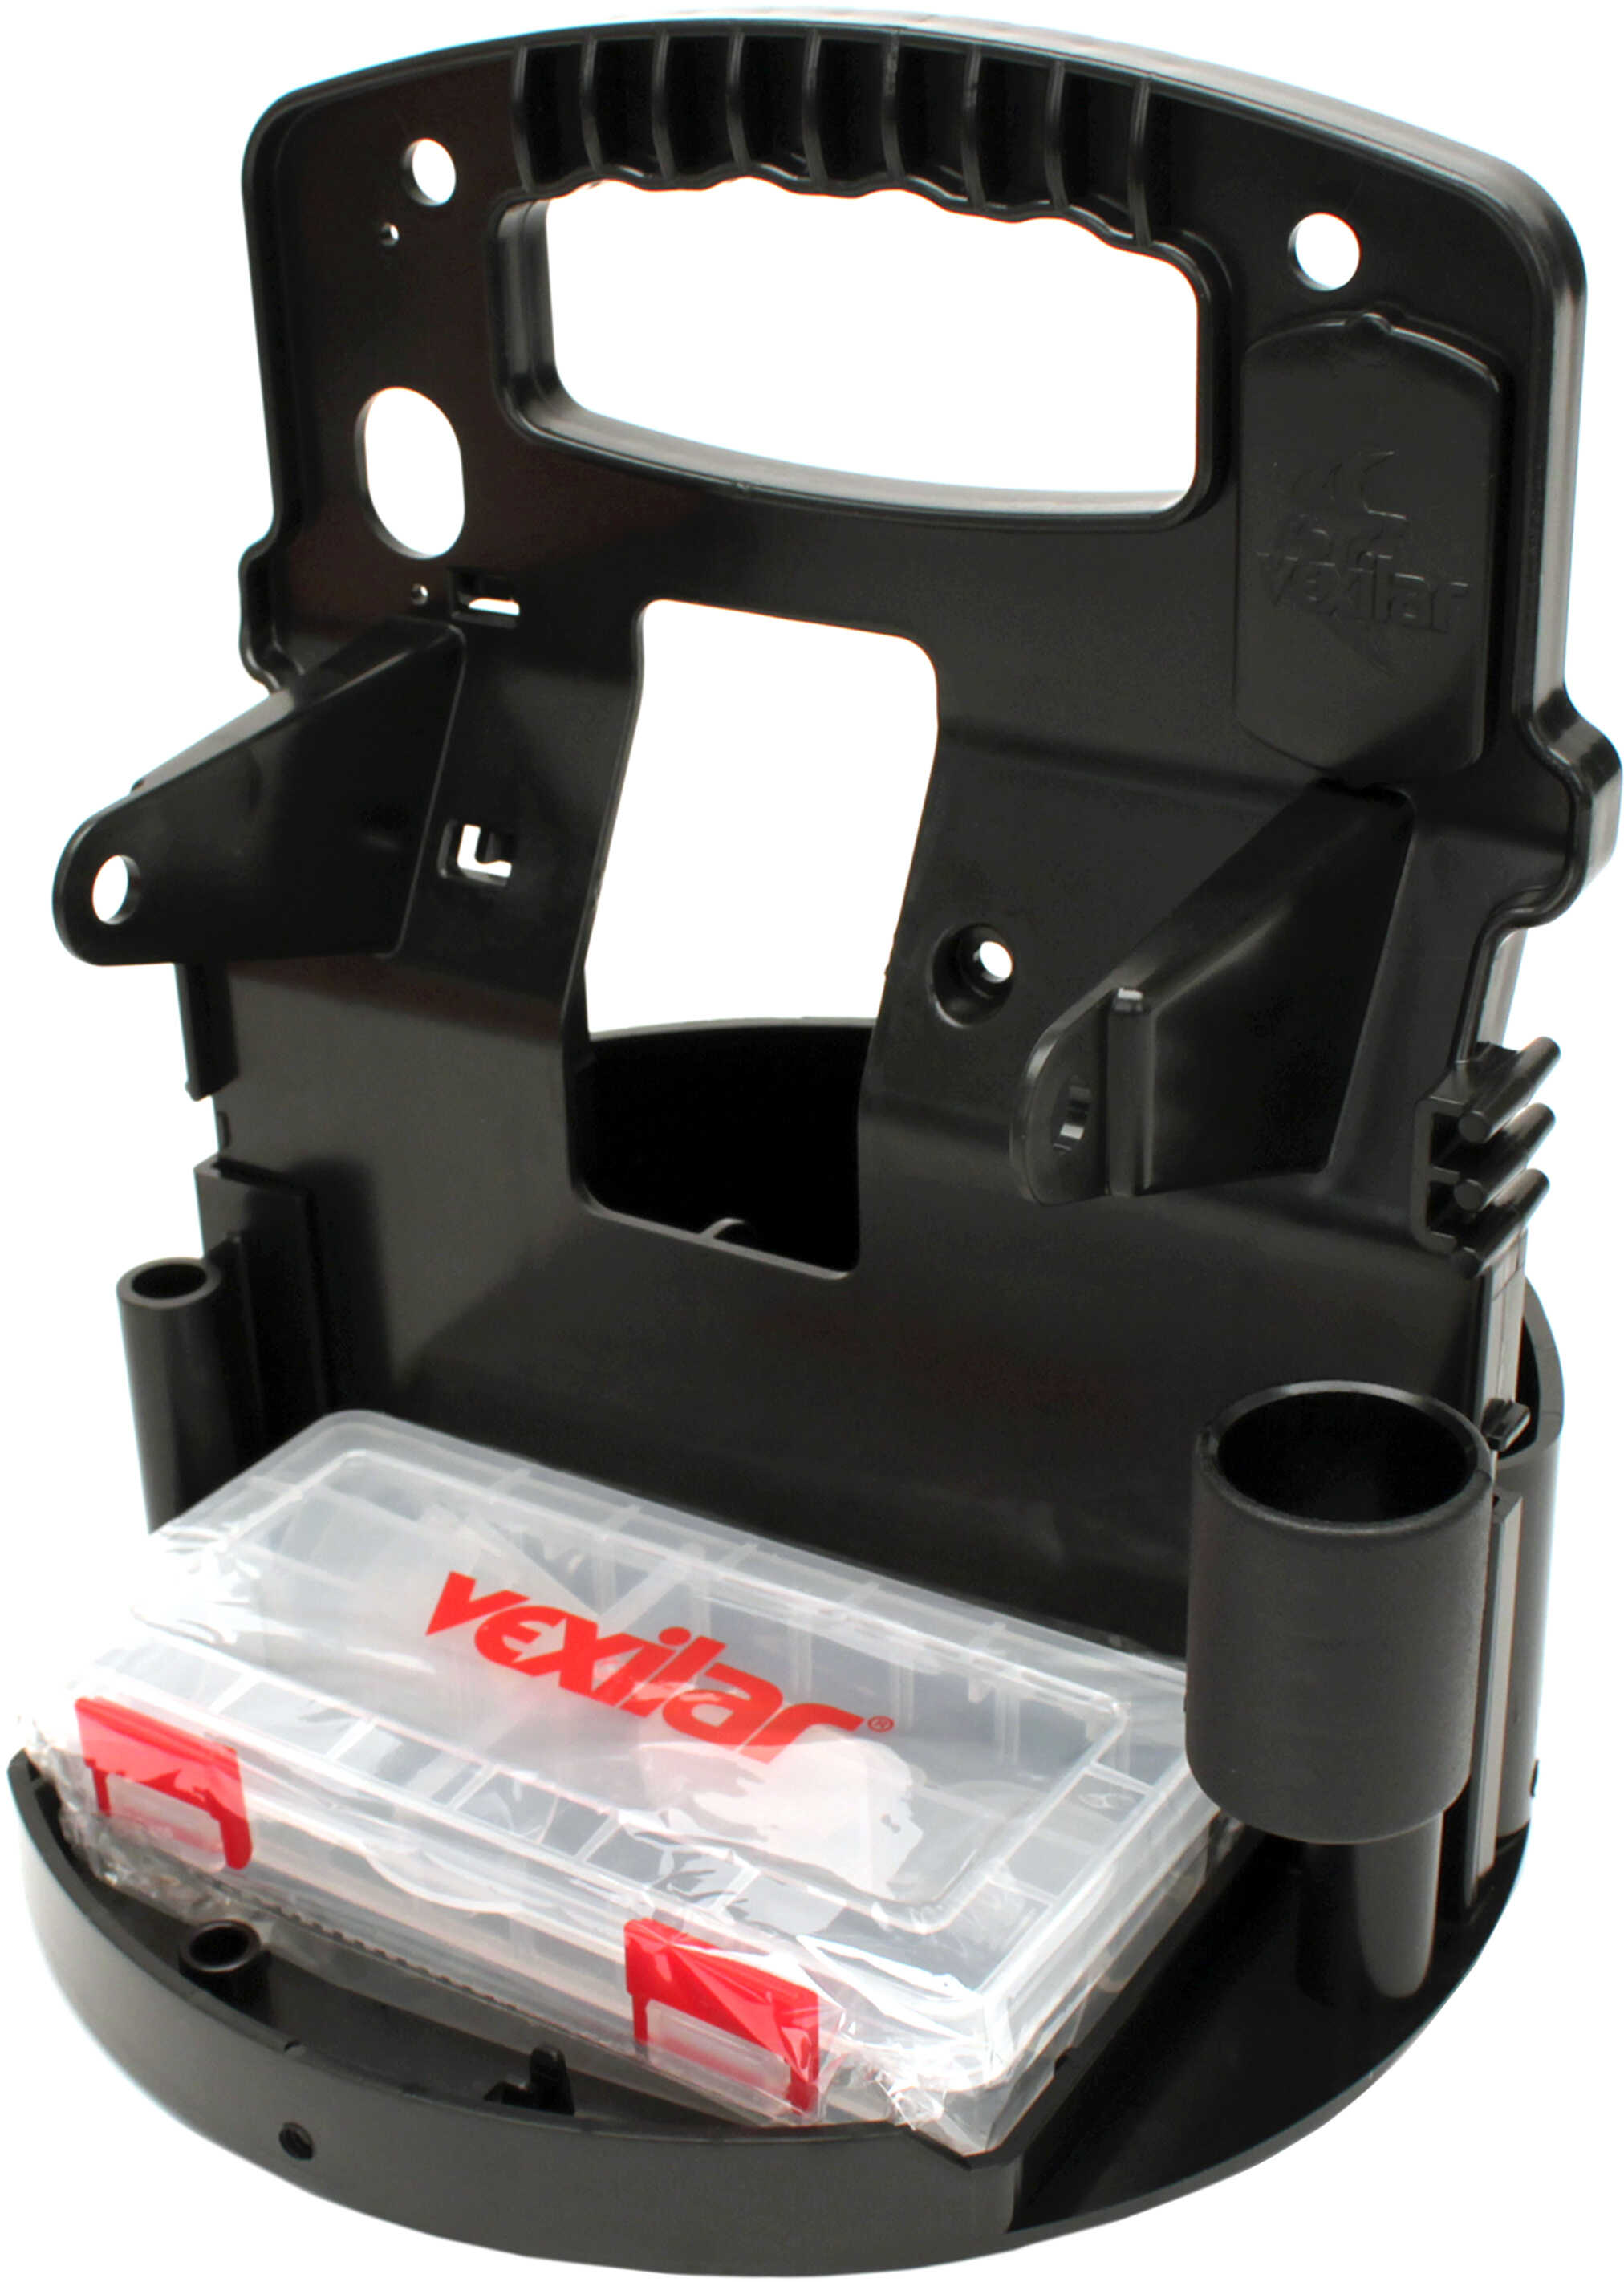 Vexilar Pro II Portable Carrying Case Md: PC-100